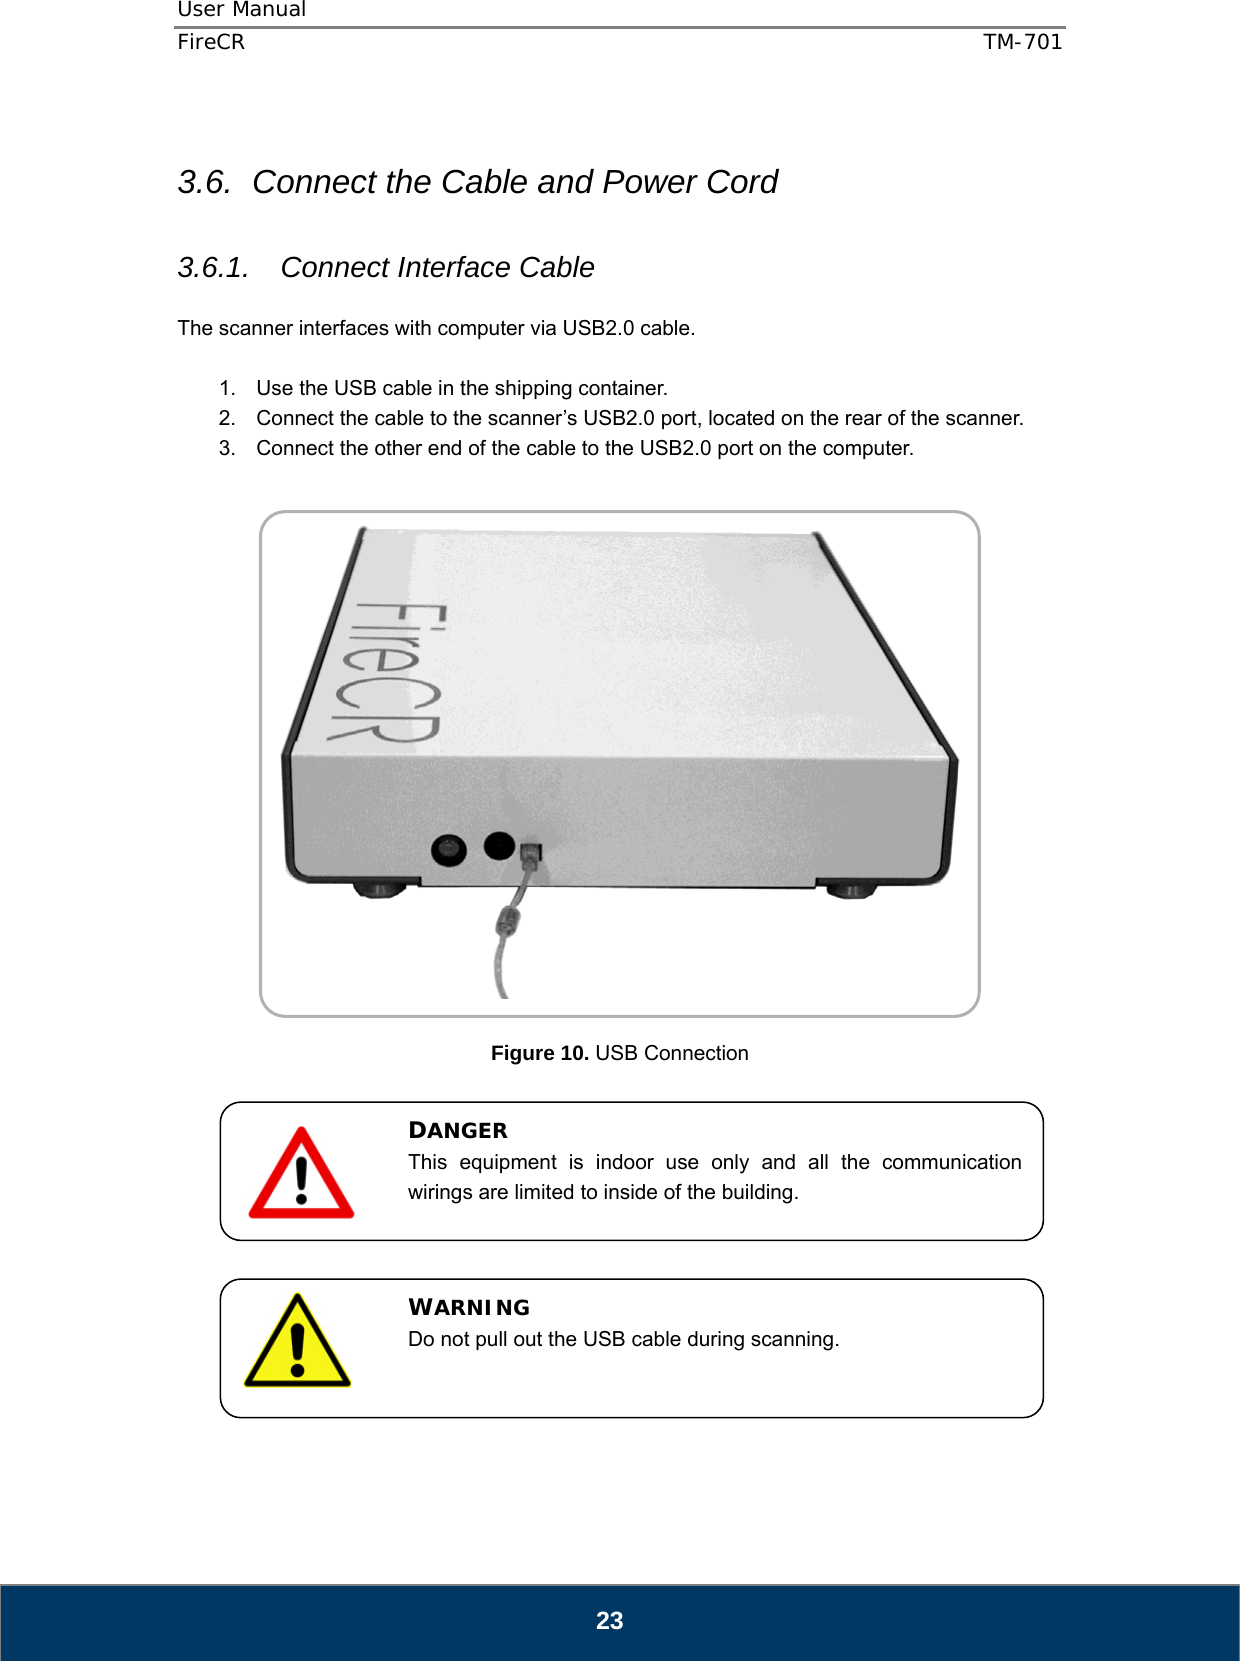 User Manual  FireCR  TM-701   23  3.6.  Connect the Cable and Power Cord  3.6.1. Connect Interface Cable  The scanner interfaces with computer via USB2.0 cable.  1.  Use the USB cable in the shipping container. 2.  Connect the cable to the scanner’s USB2.0 port, located on the rear of the scanner. 3.  Connect the other end of the cable to the USB2.0 port on the computer.     Figure 10. USB Connection              DANGER This equipment is indoor use only and all the communication wirings are limited to inside of the building.  WARNING Do not pull out the USB cable during scanning. 